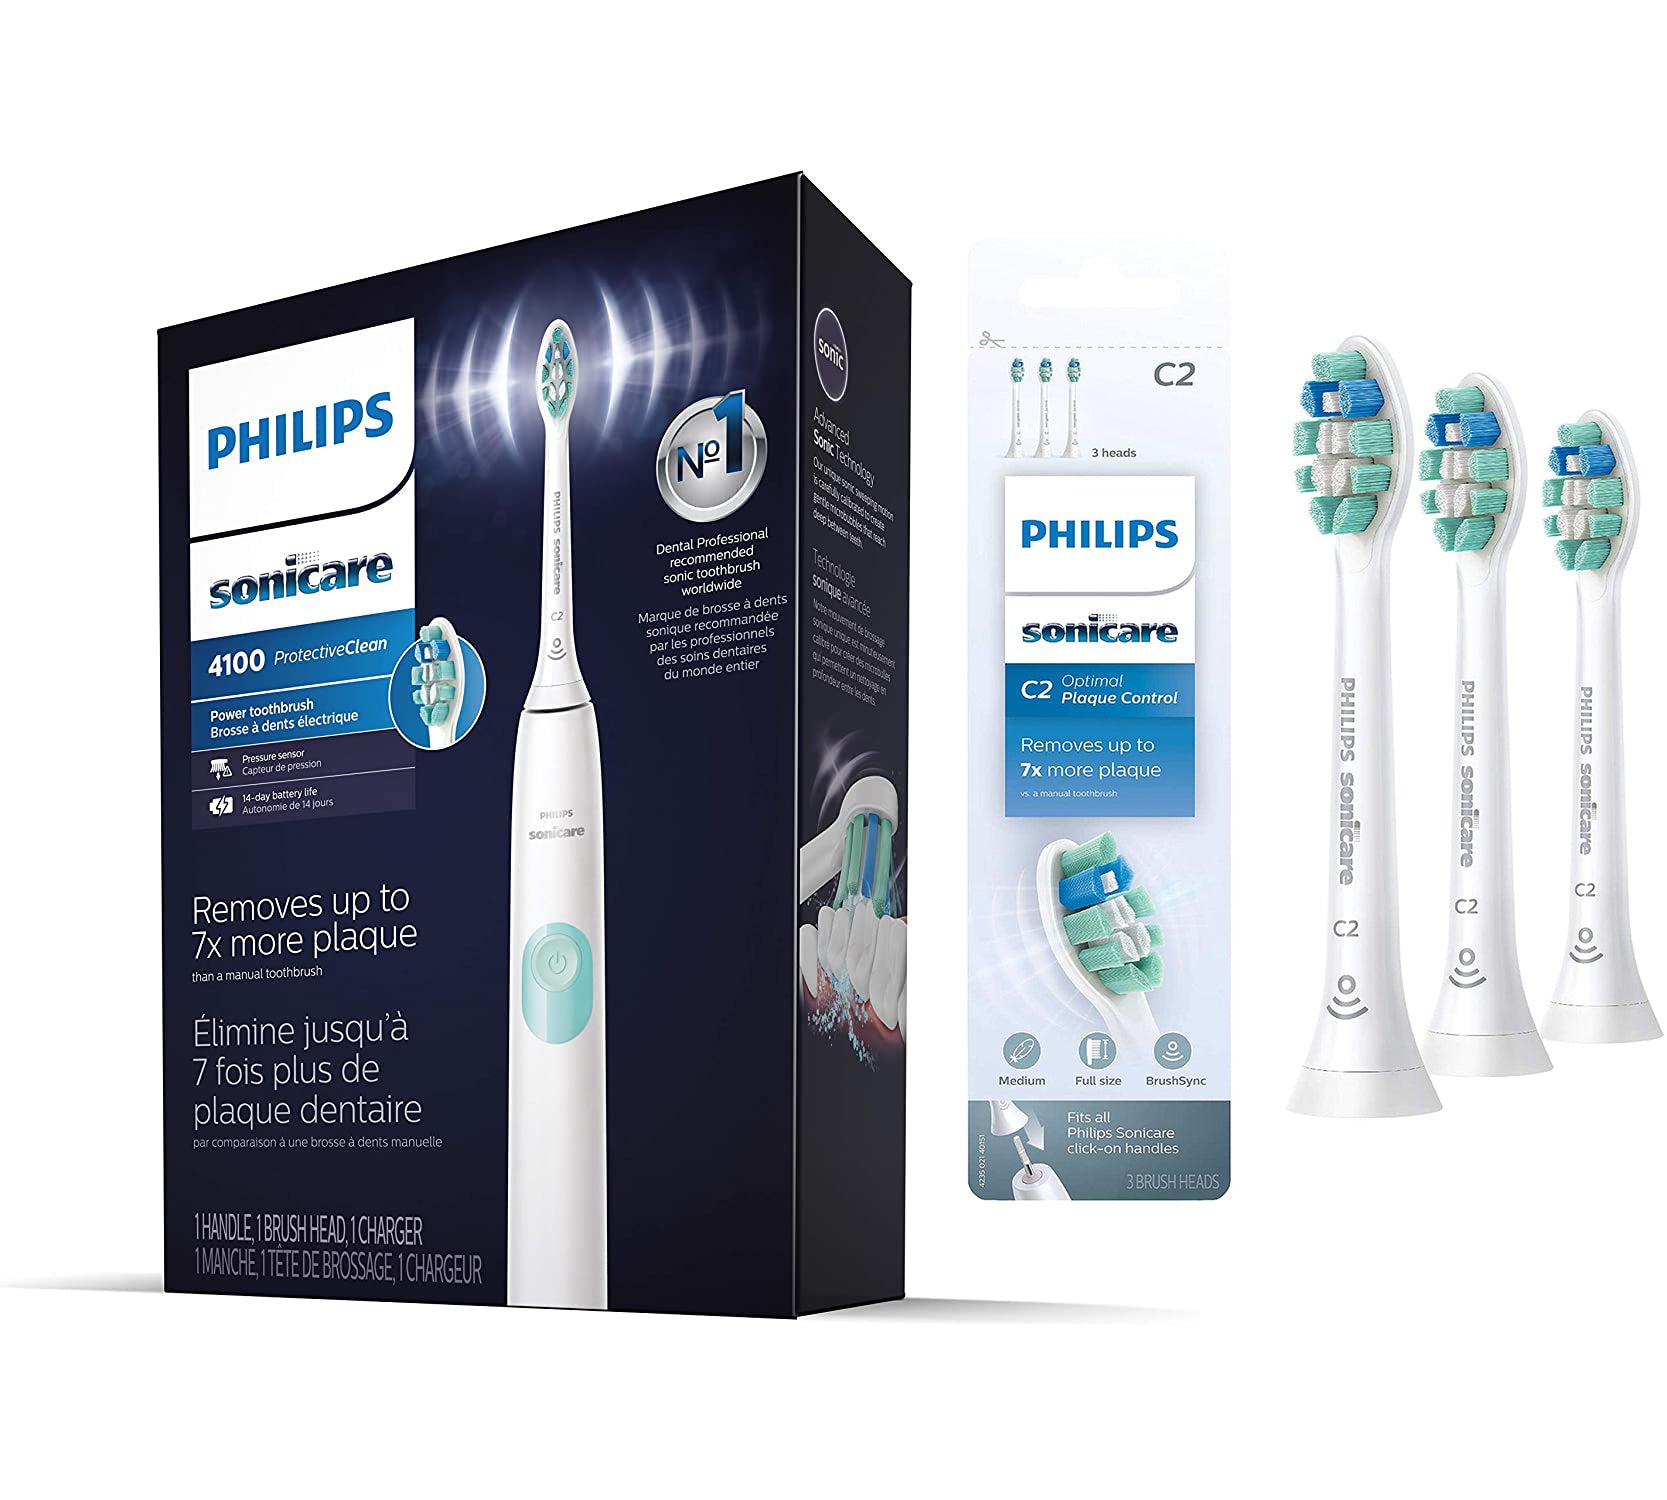 Philips Sonicare HX6817/01 ProtectiveClean 4100 Electric Toothbrush with 3 Pack Replacement Heads - Pro-Distributing